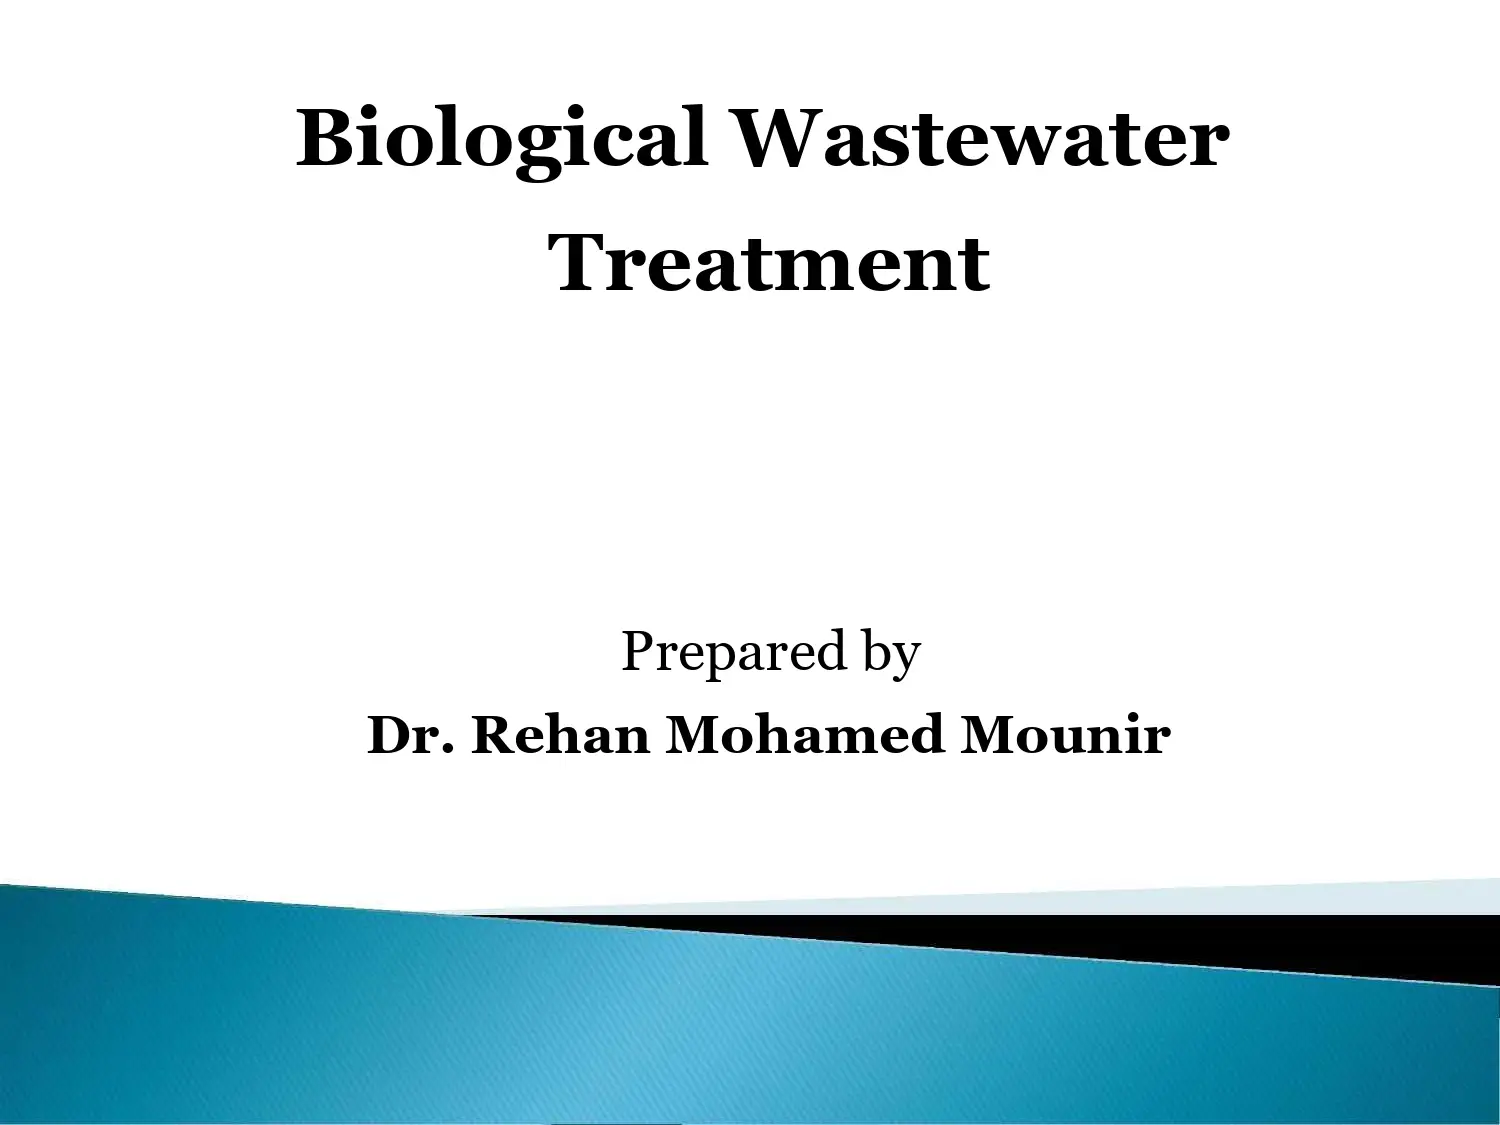 Biological Wastewater Treatment